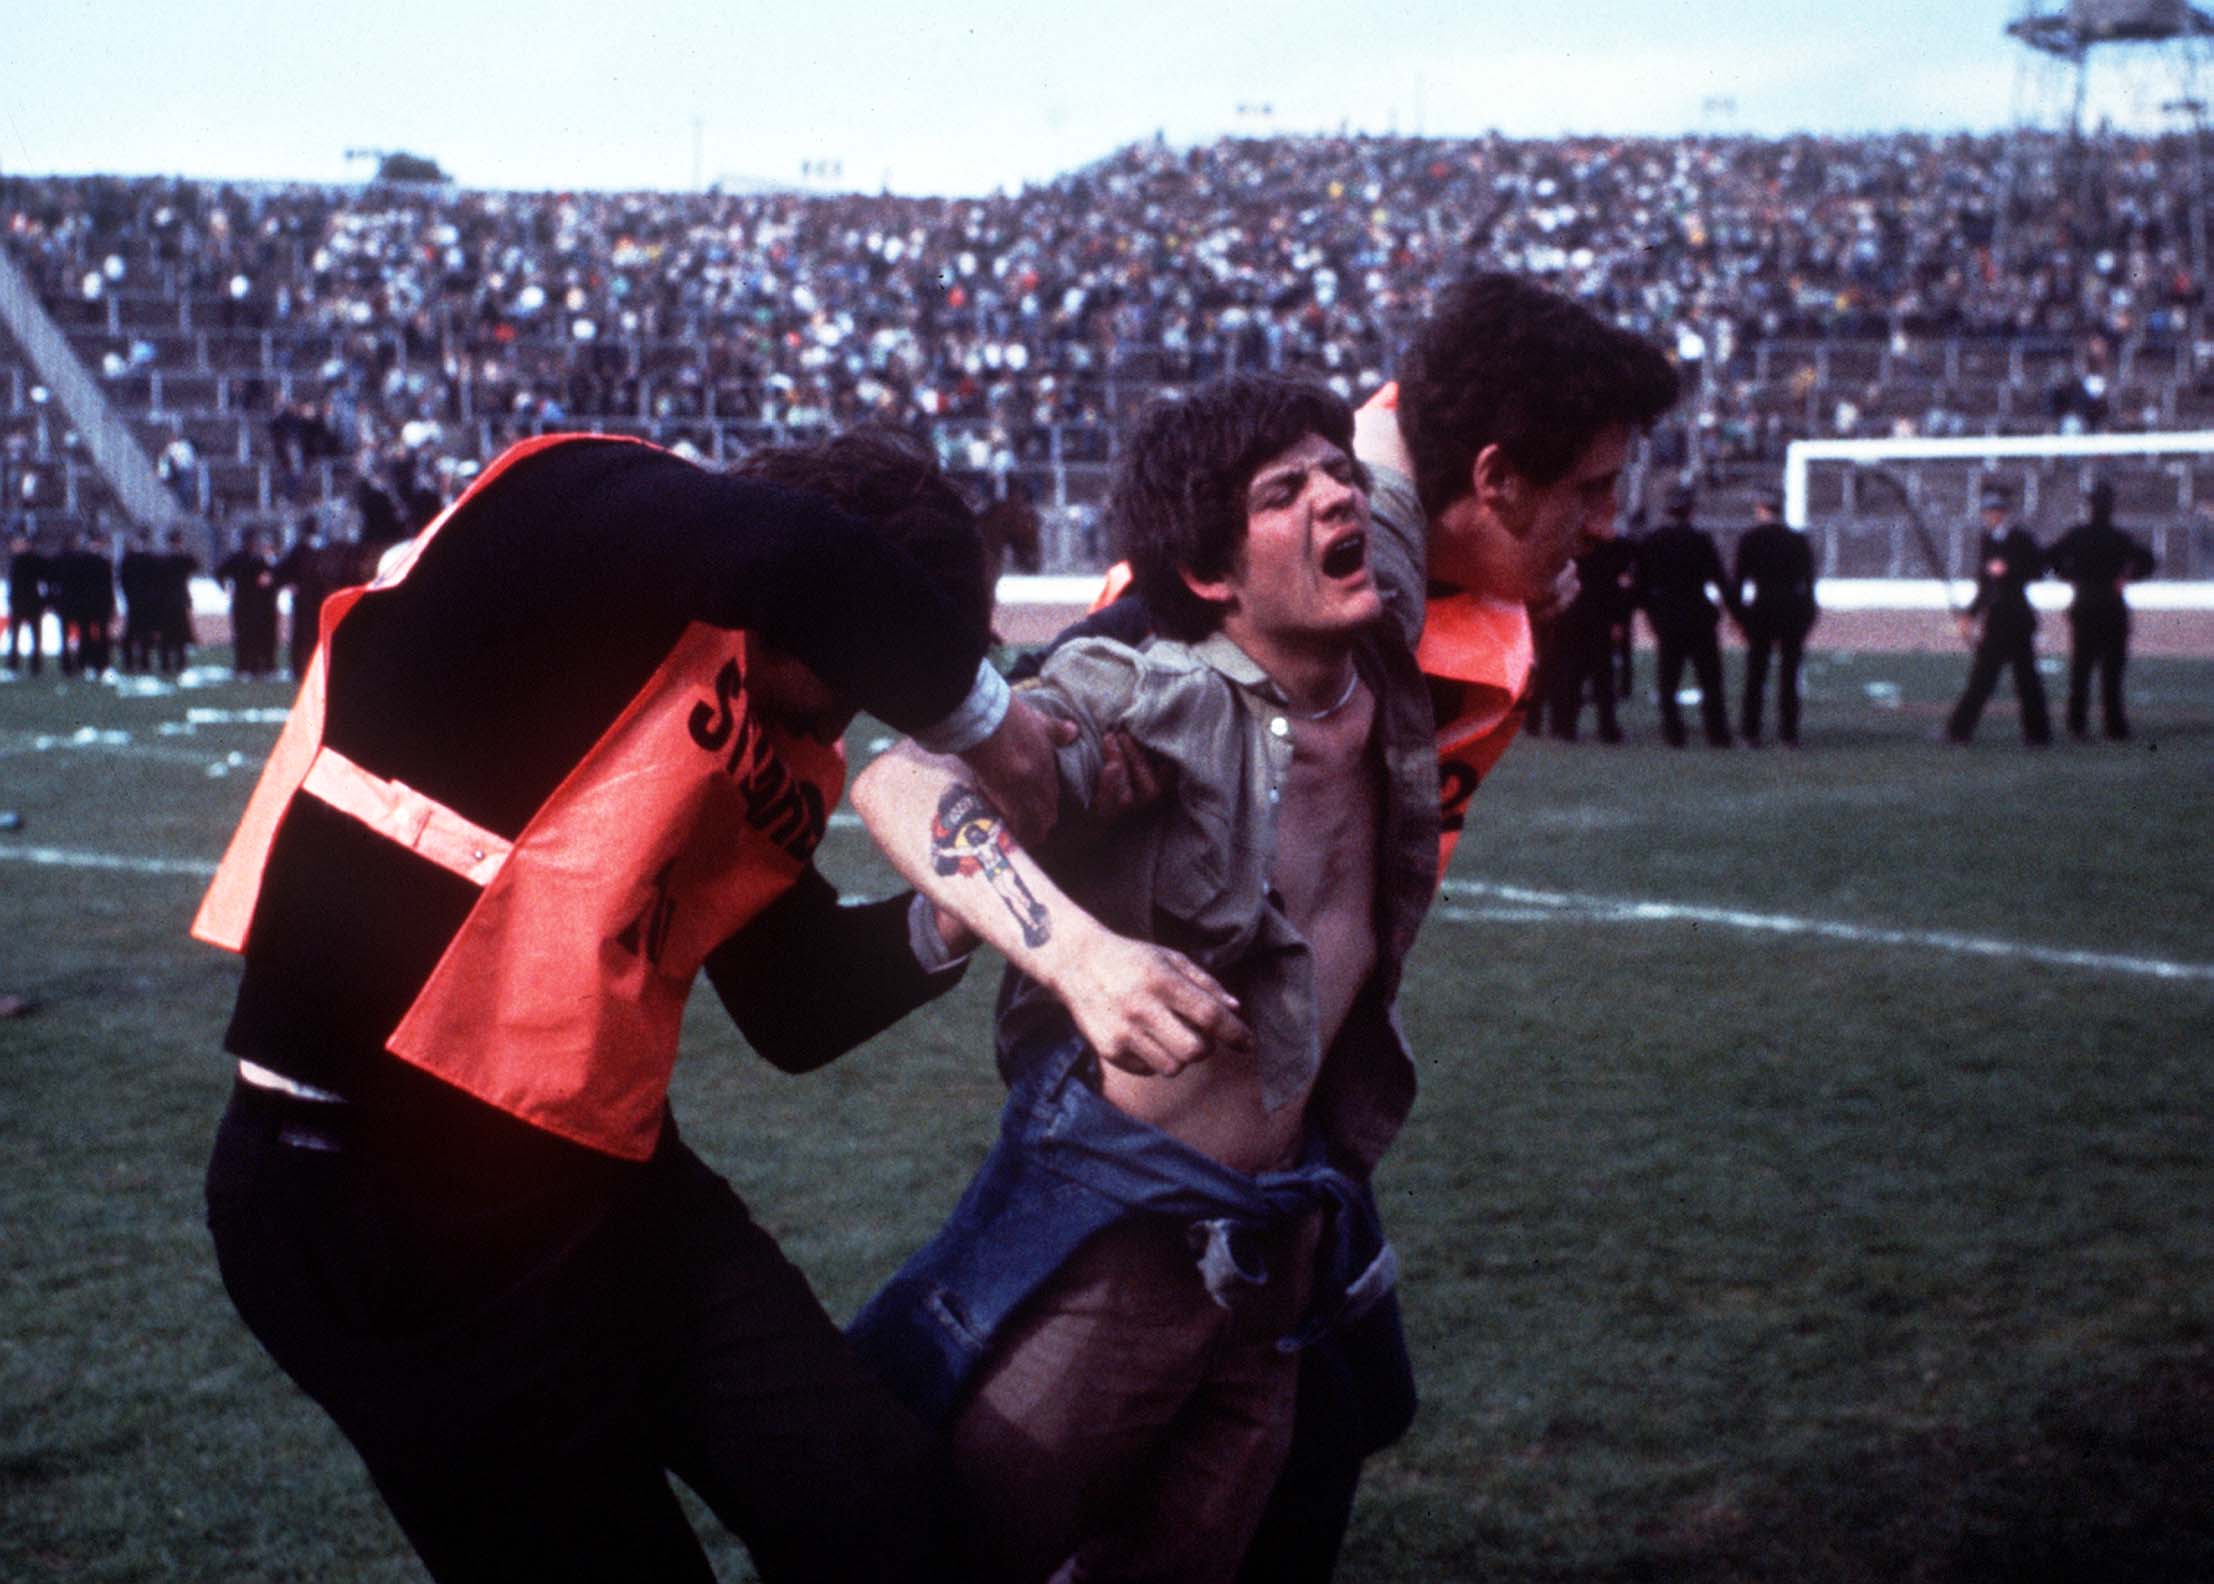 Stewards remove a fan during the Scottish Cup Final at Hampden in May 1980